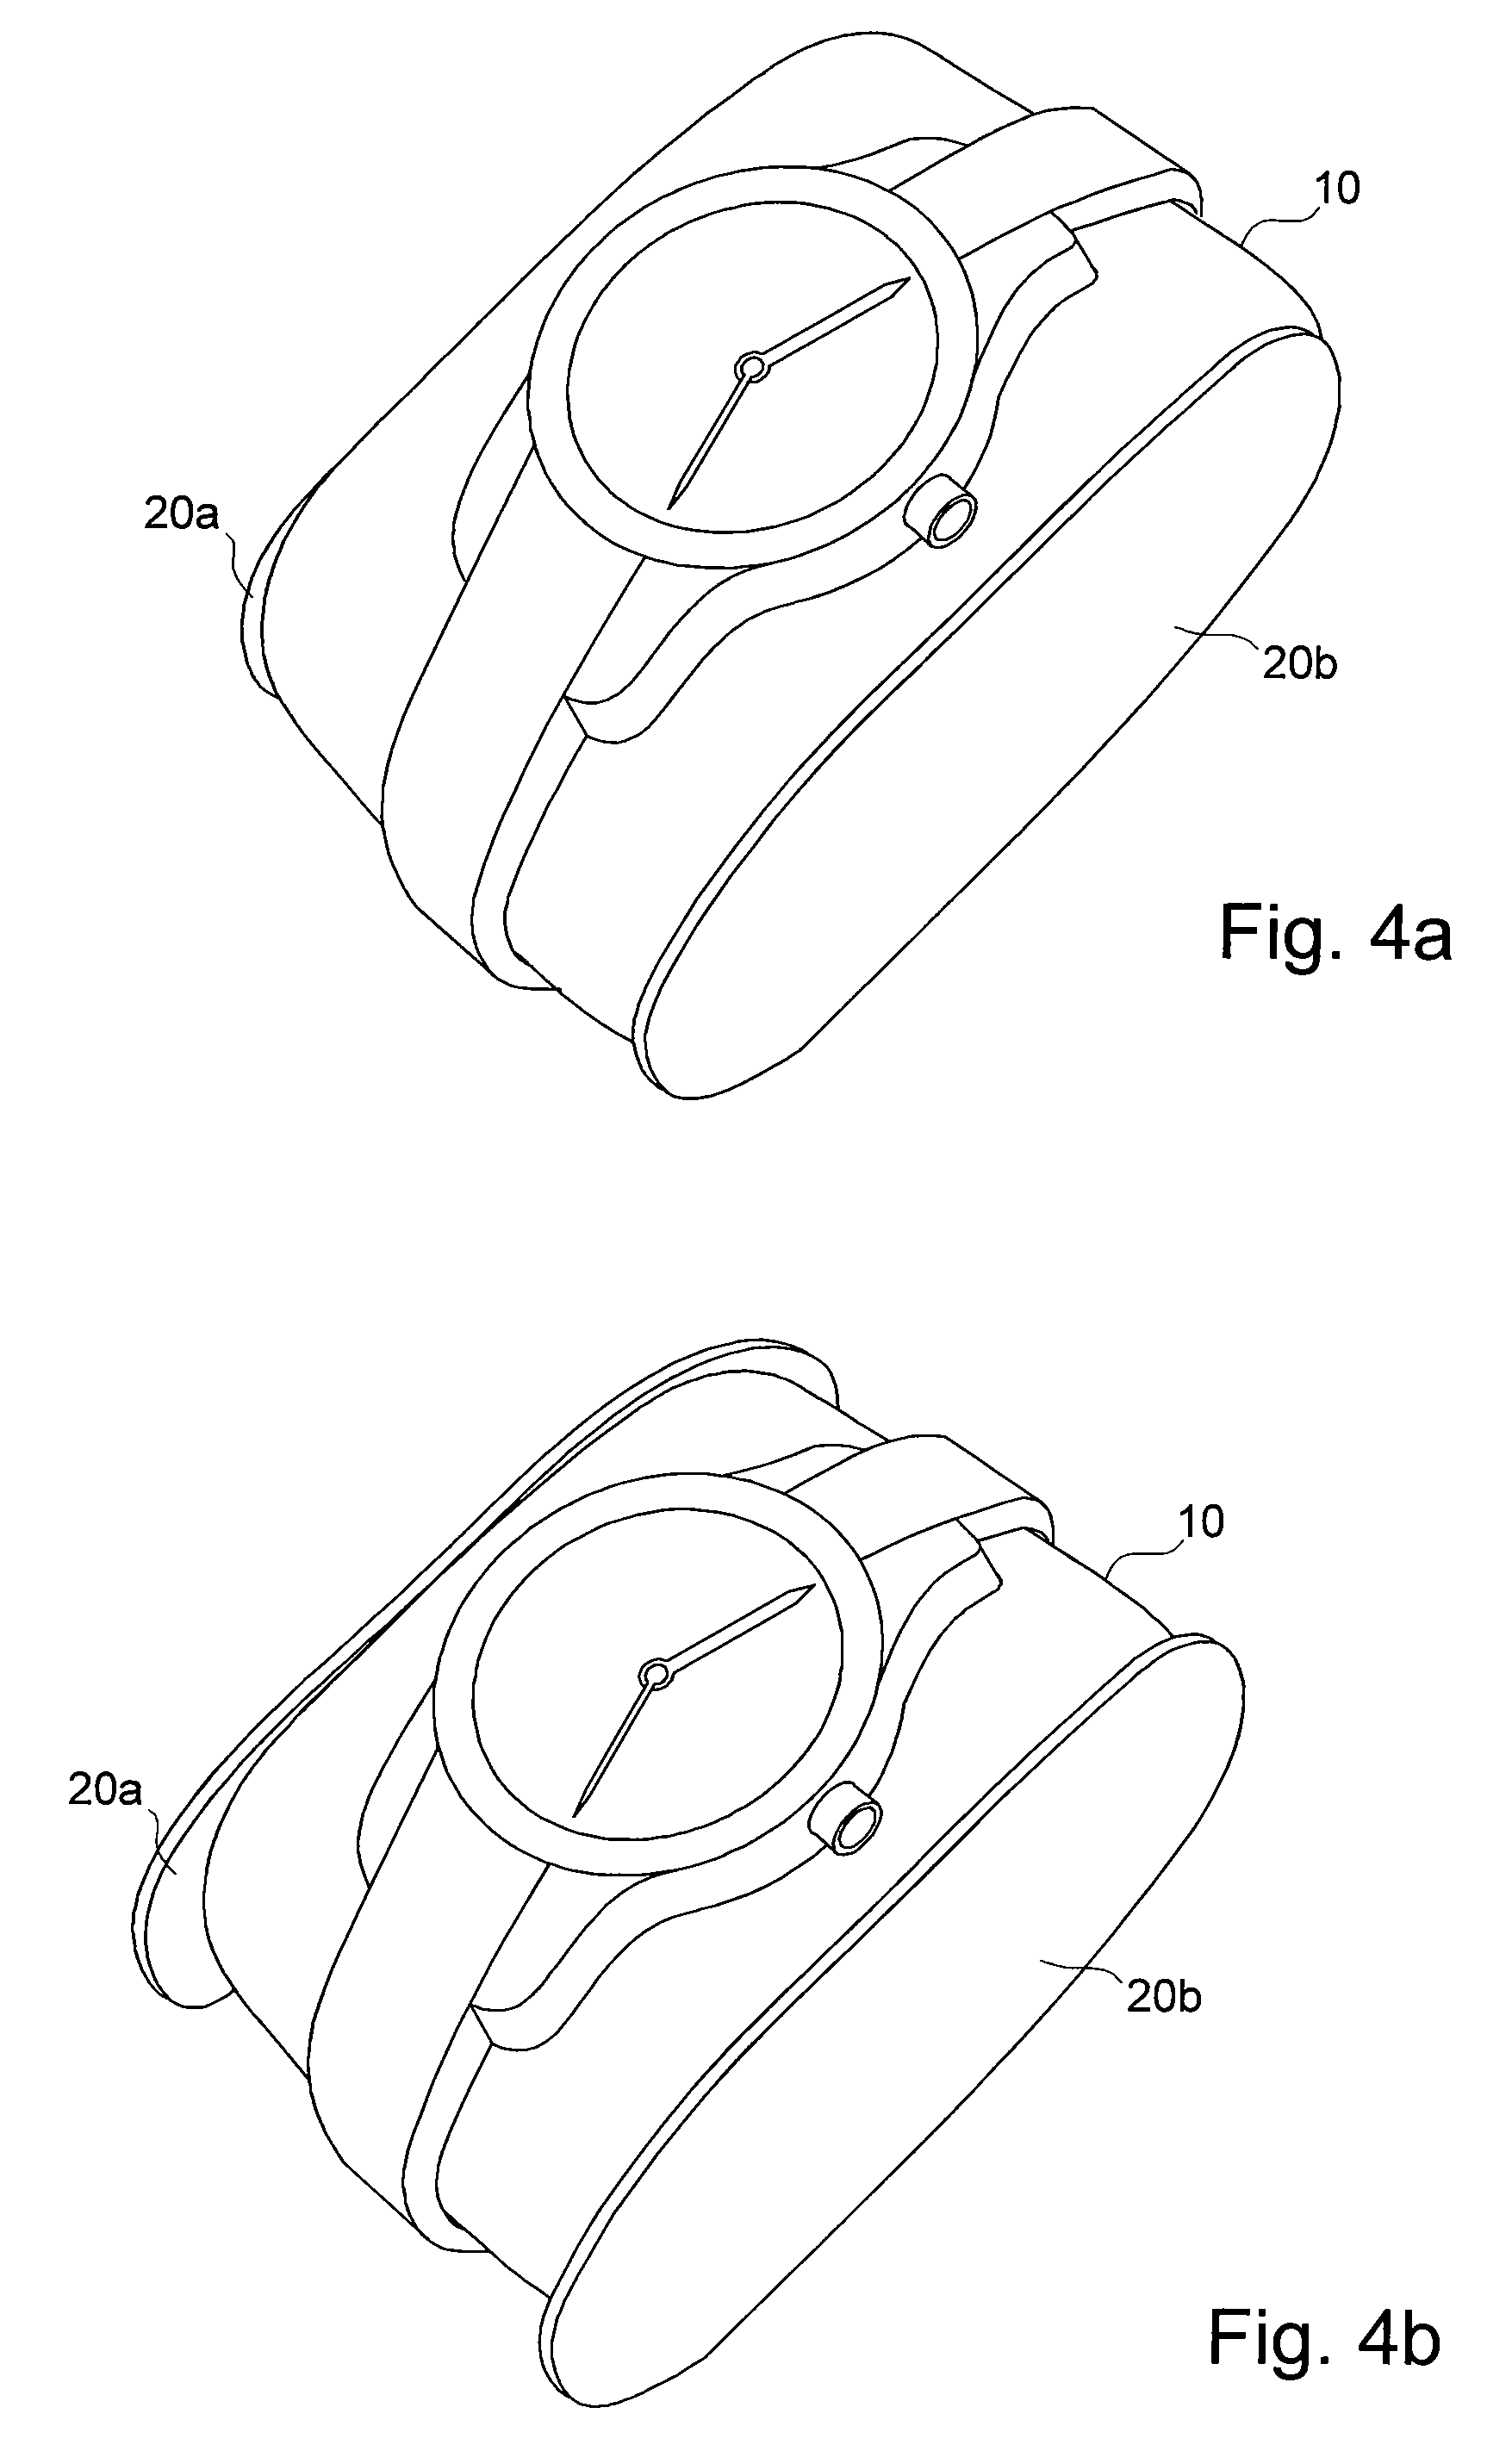 Display support element for wristband and wristwatch